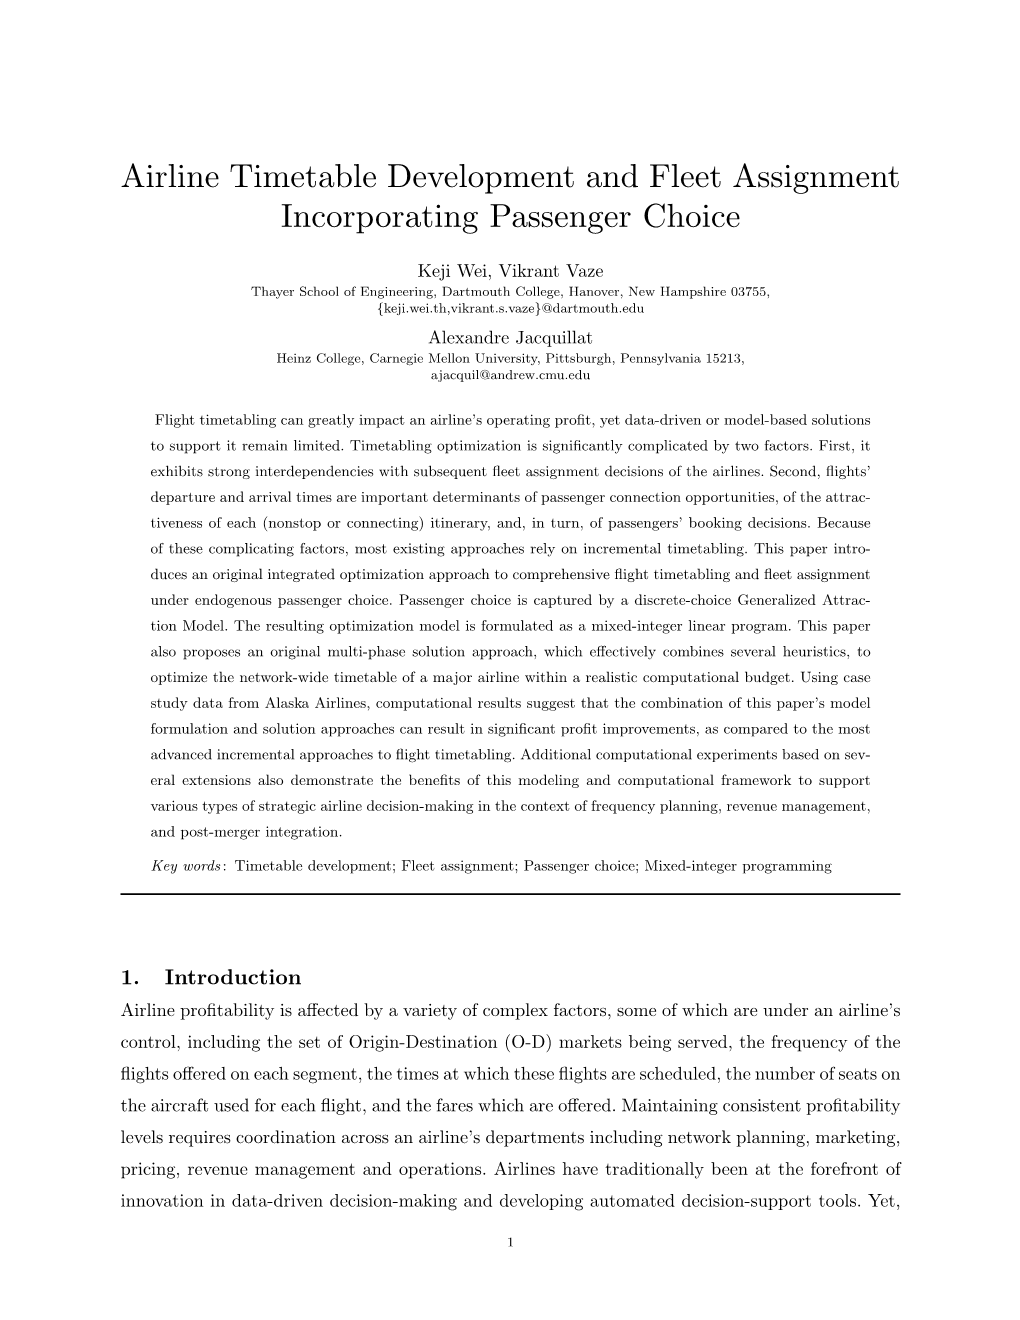 Airline Timetable Development and Fleet Assignment Incorporating Passenger Choice